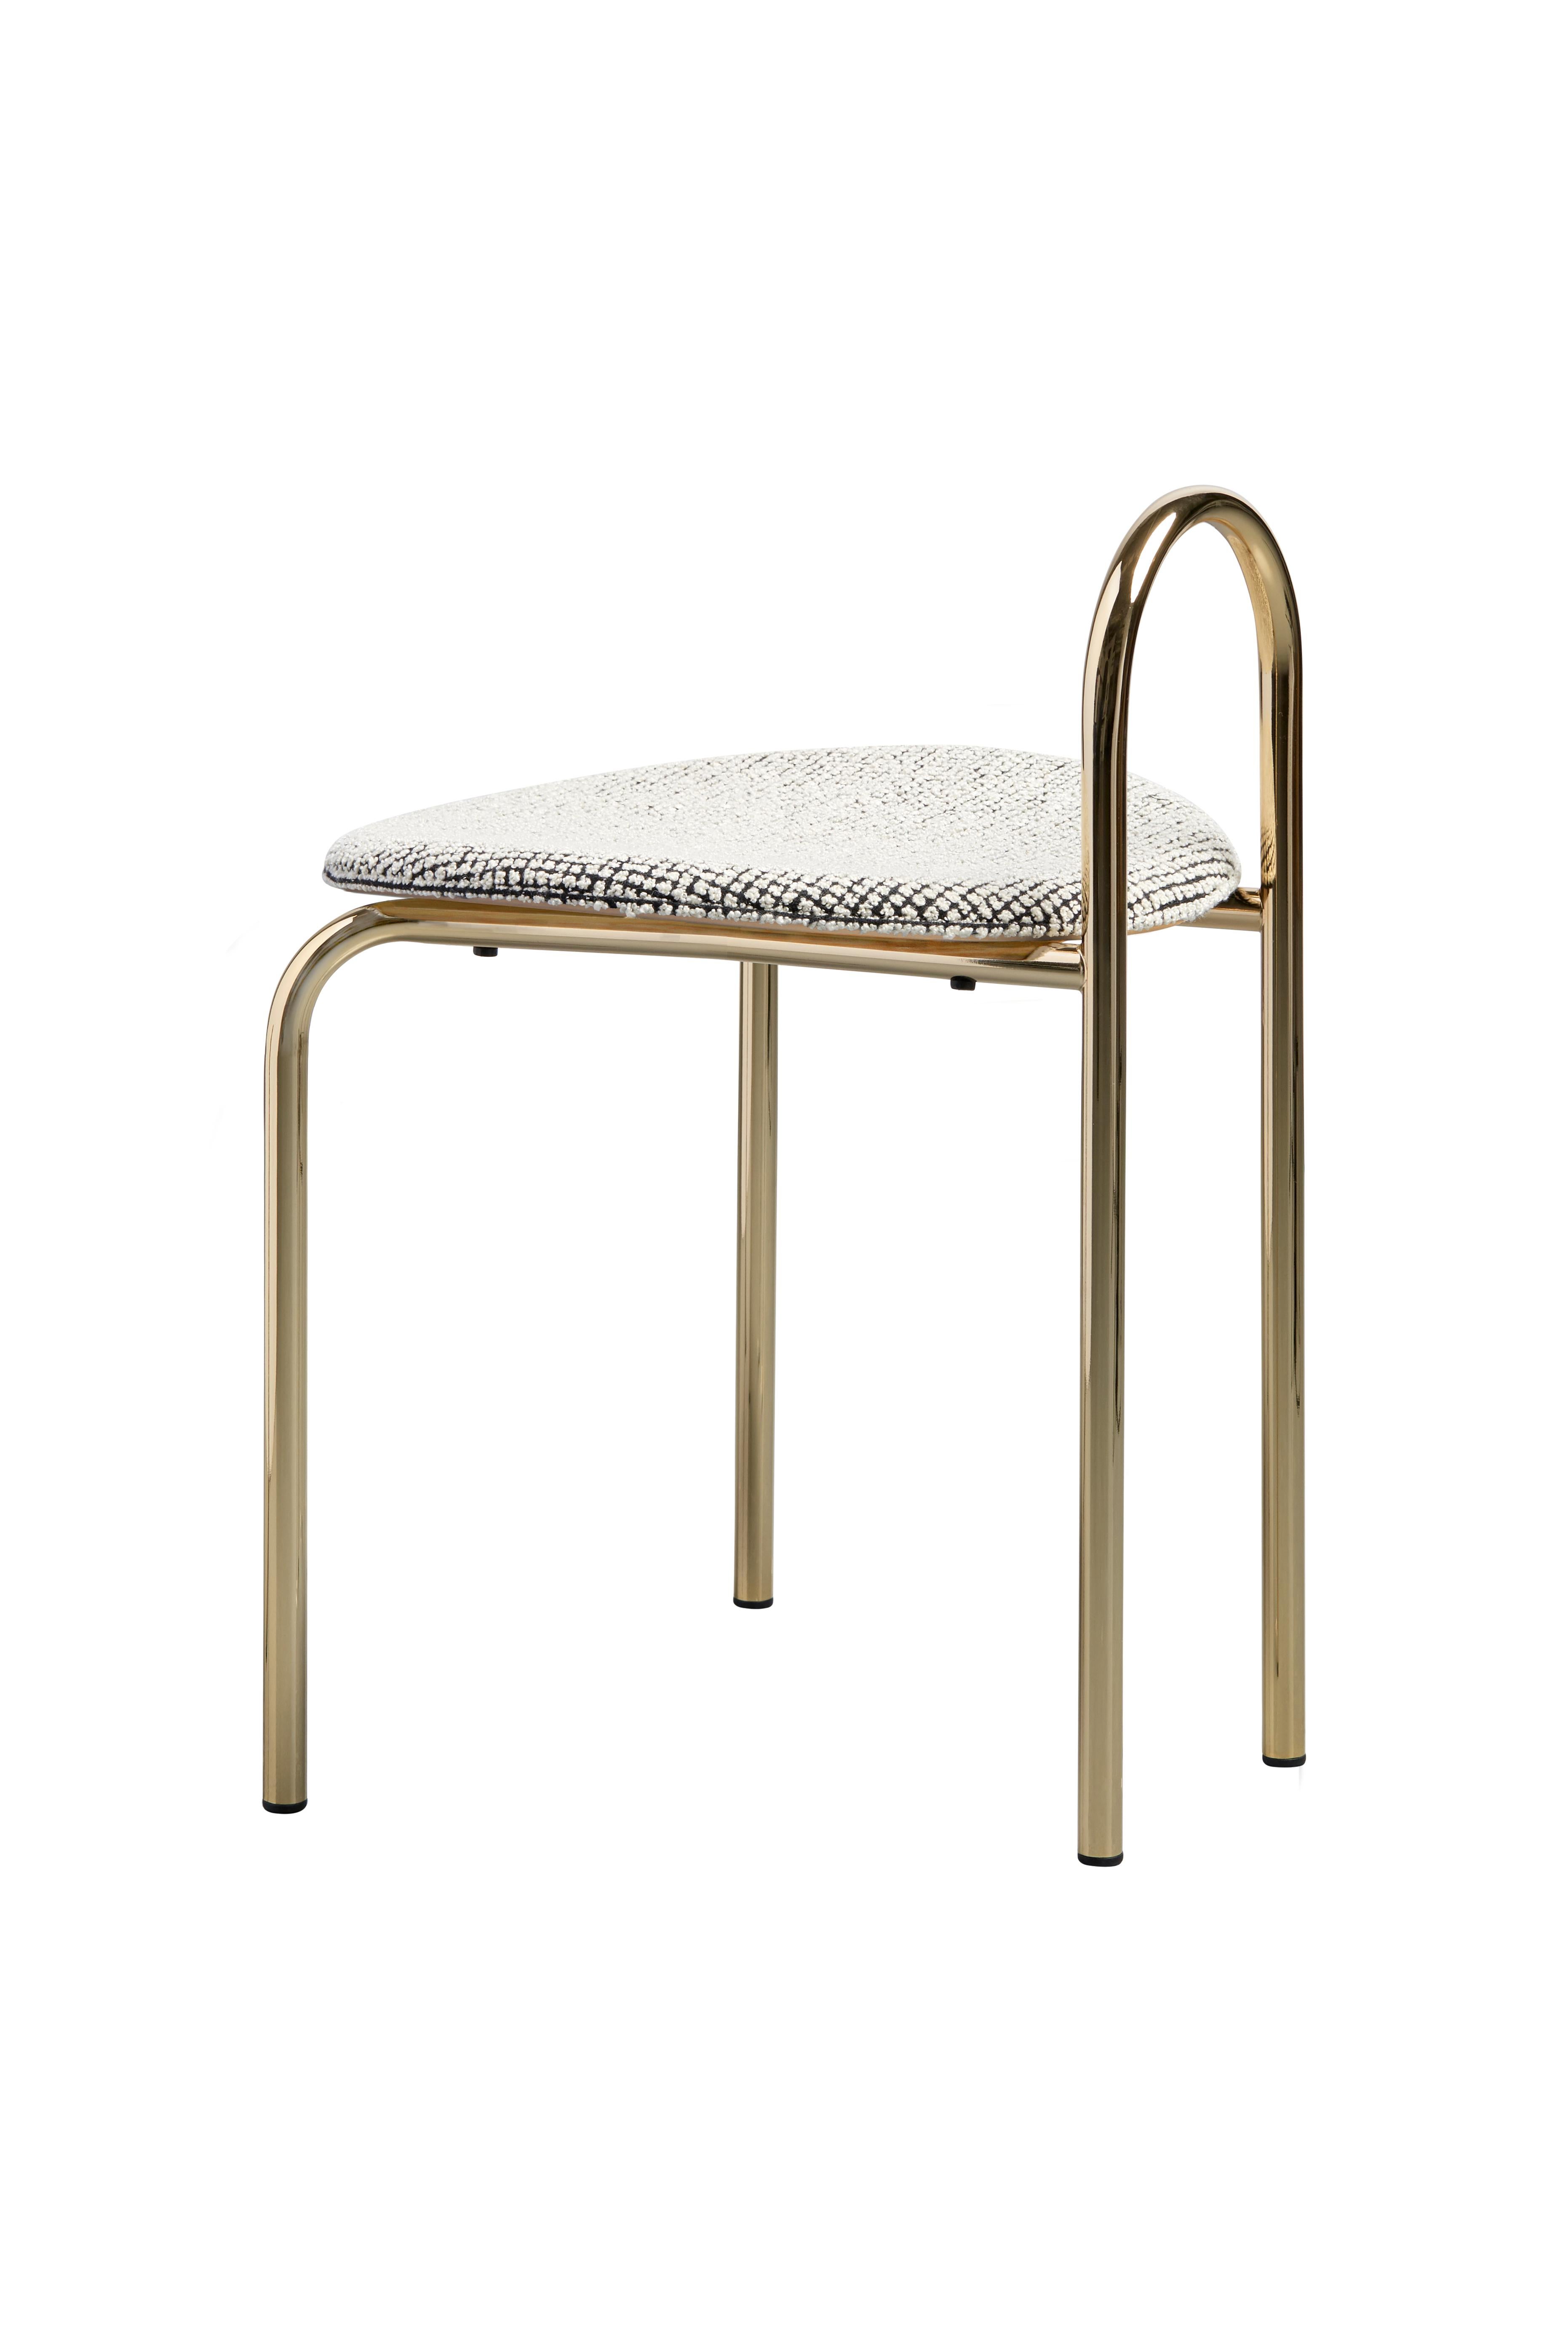 Minimalist SP01 Michelle Stool Upholstered in Gold Chrome, Made in Italy For Sale